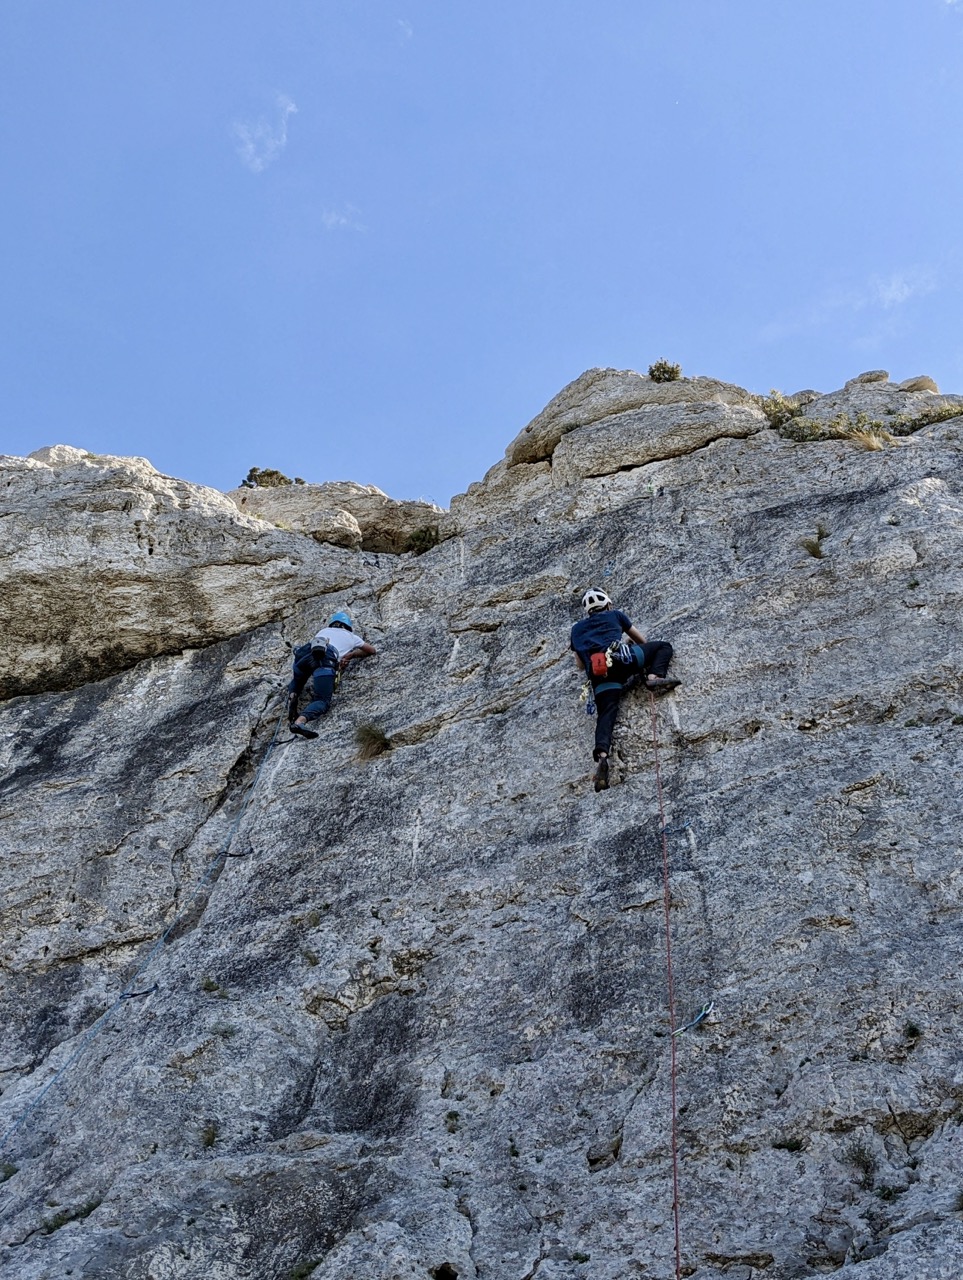 Finding my feet on Vent de Panique (right) whilst Jamie (left) performs the final moves on Tapage Diurne. 